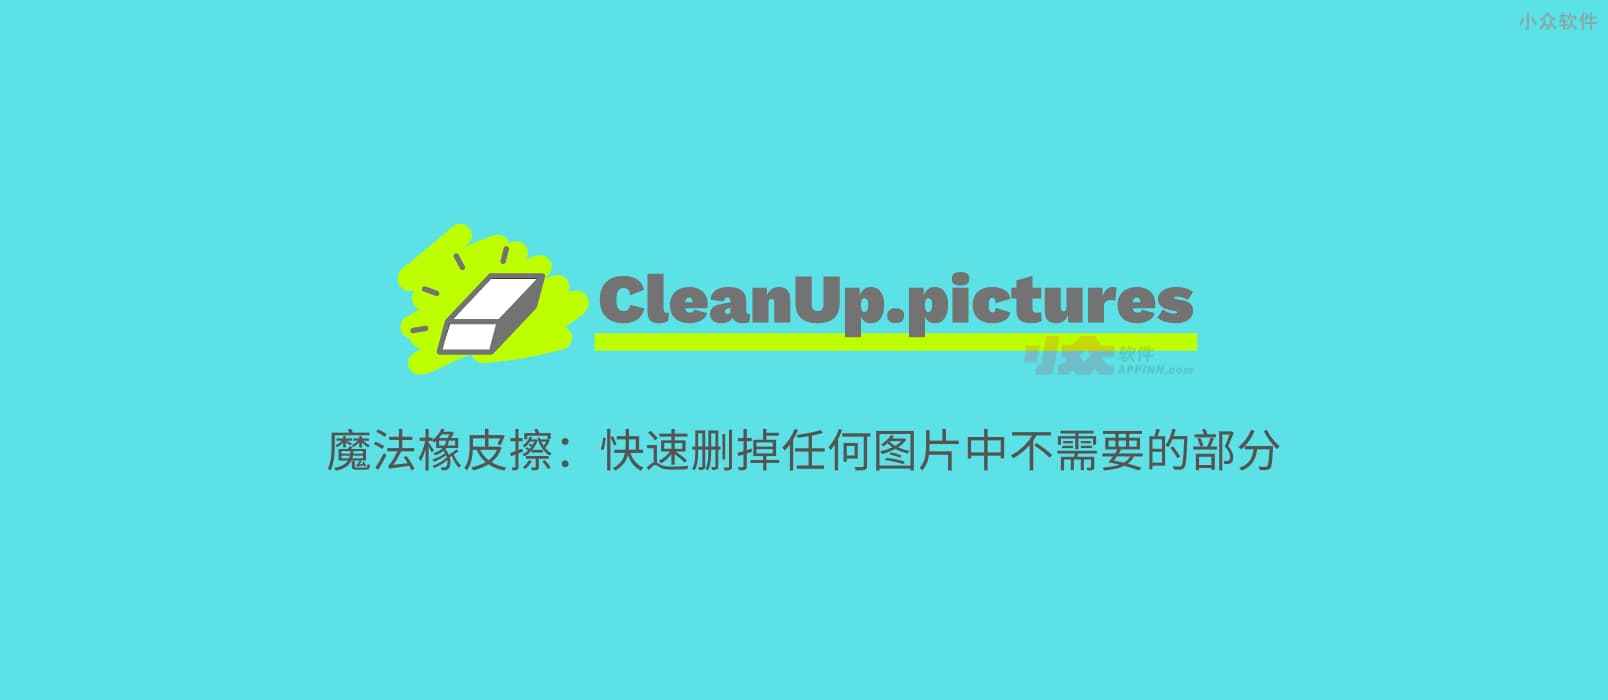 CleanUp.pictures – 魔法橡皮擦：快速删掉任何图片中不需要的部分